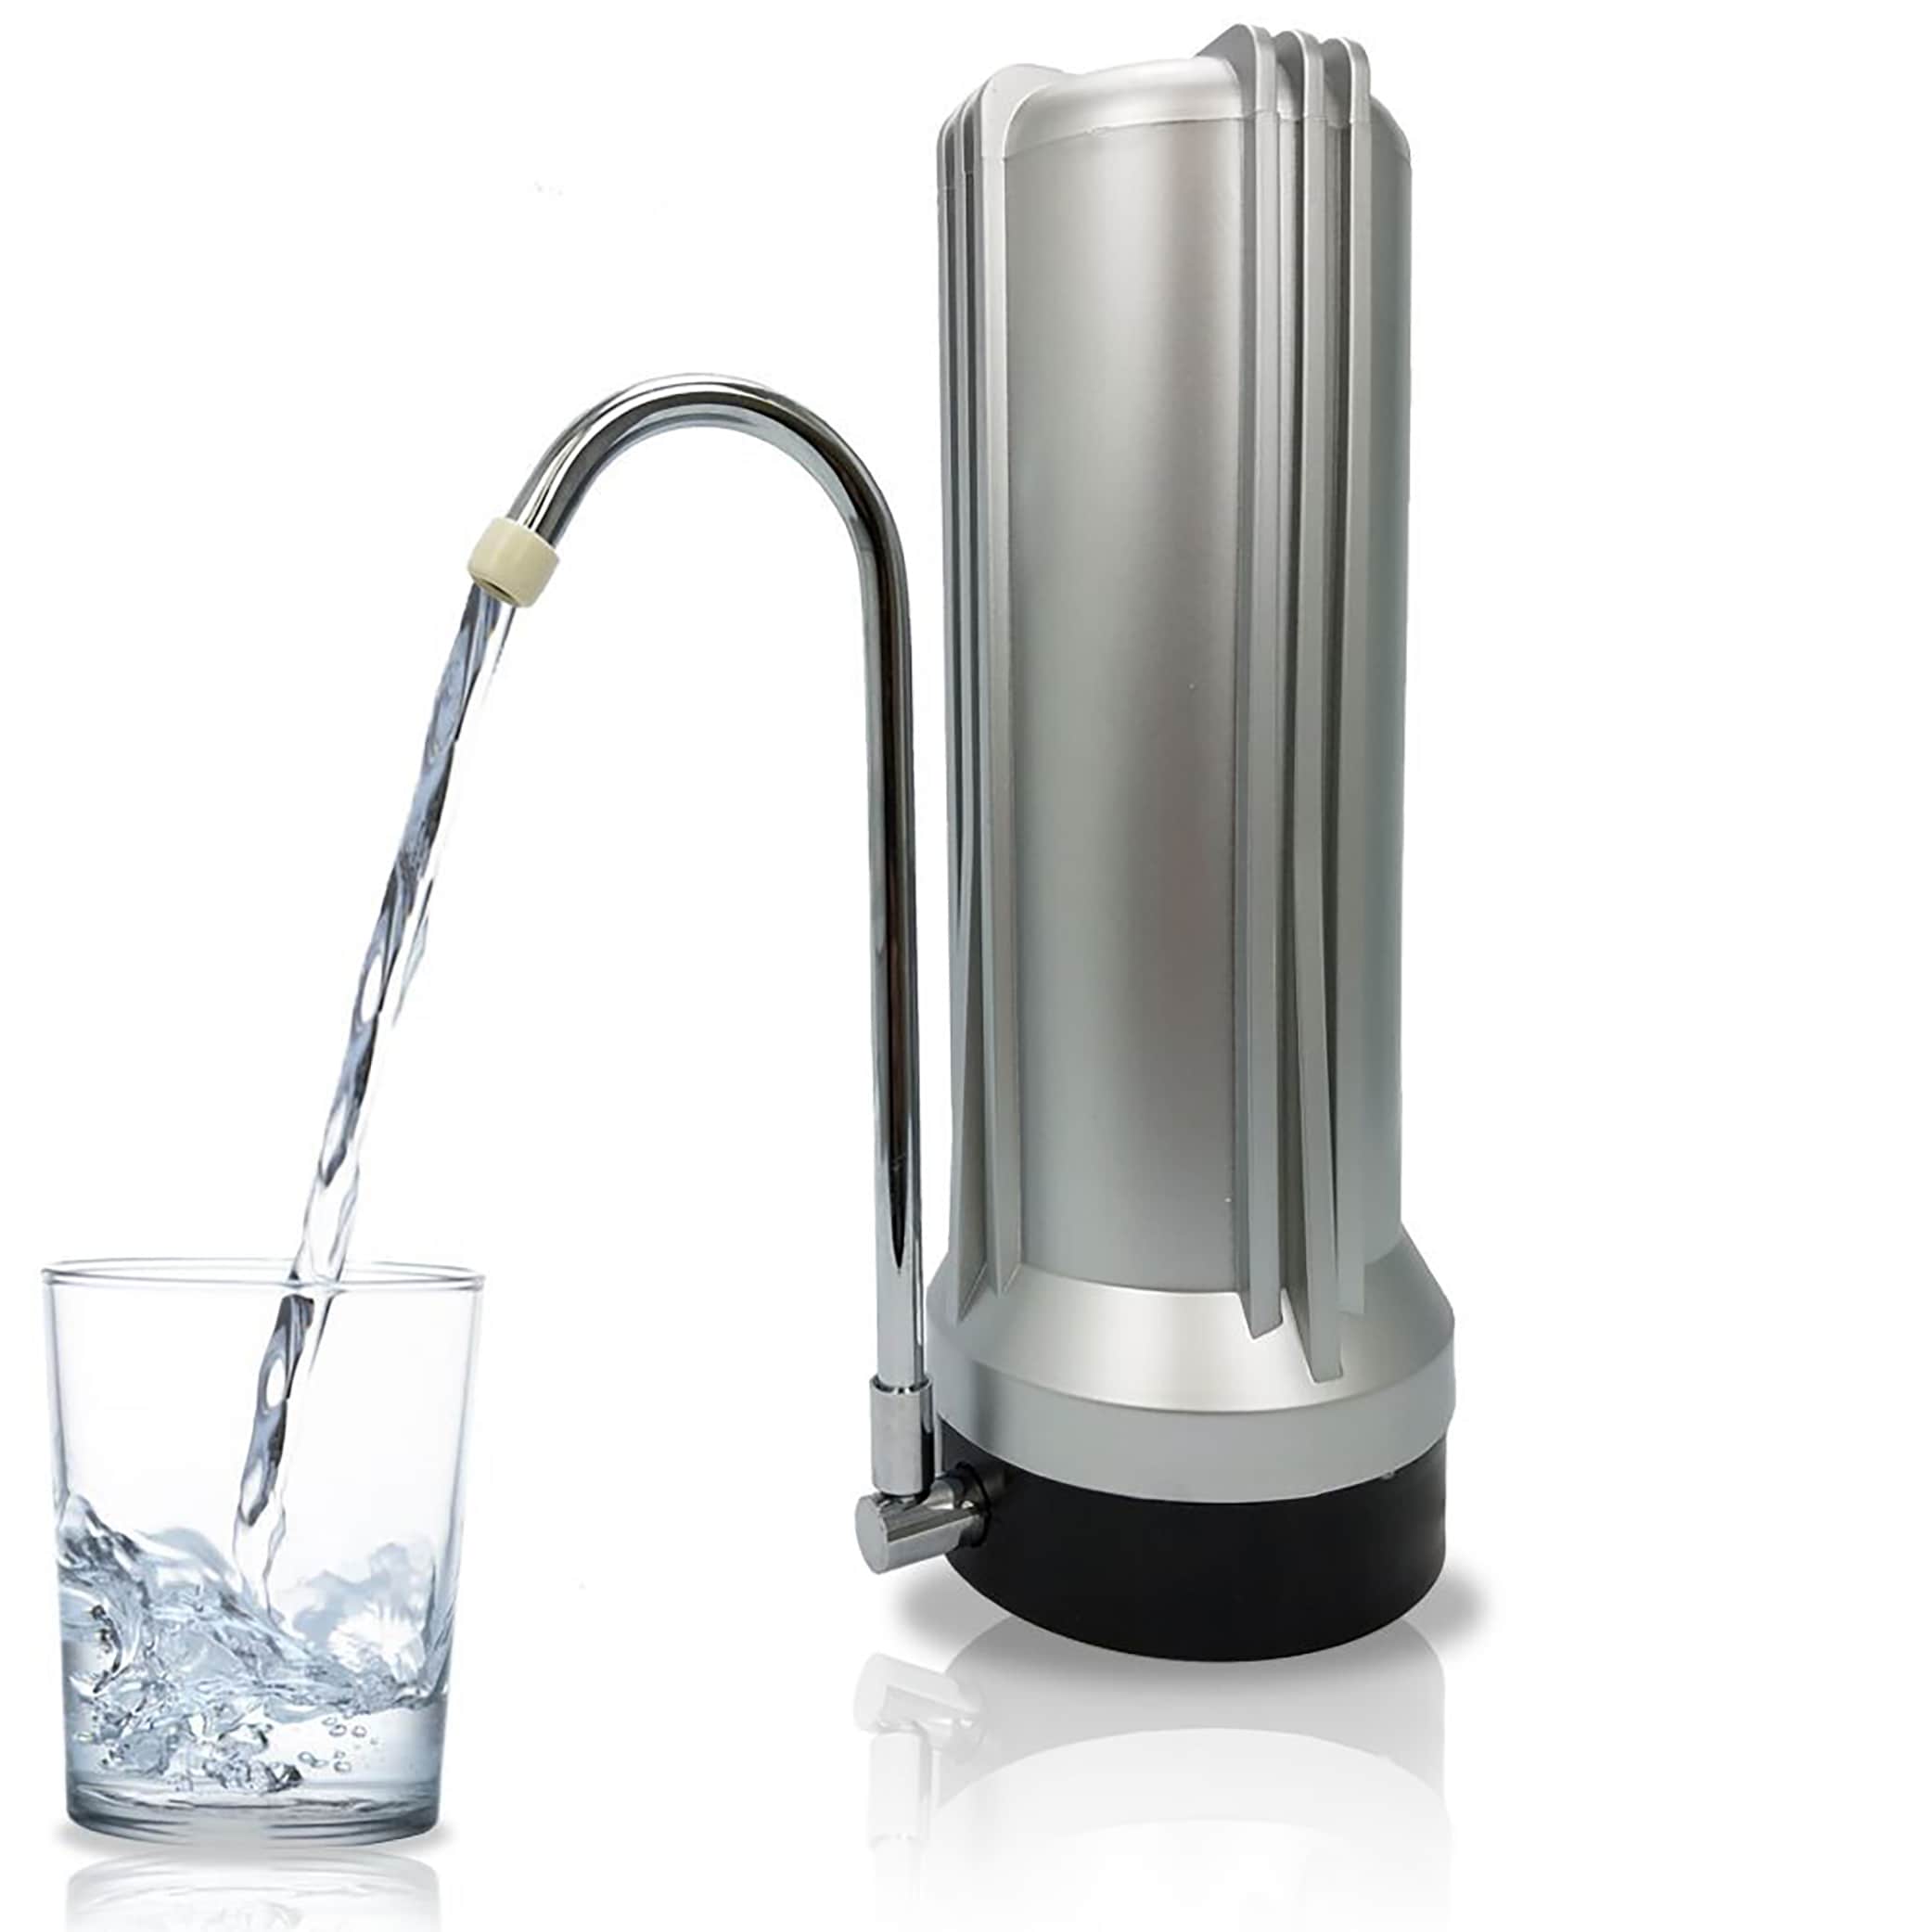 APEX MR-1050 Countertop Water Filter, 5 Stage Mineral pH Alkaline Easy  Install Faucet Water Filter - Reduces Heavy Metals, Bad Taste and Up to 99%  of